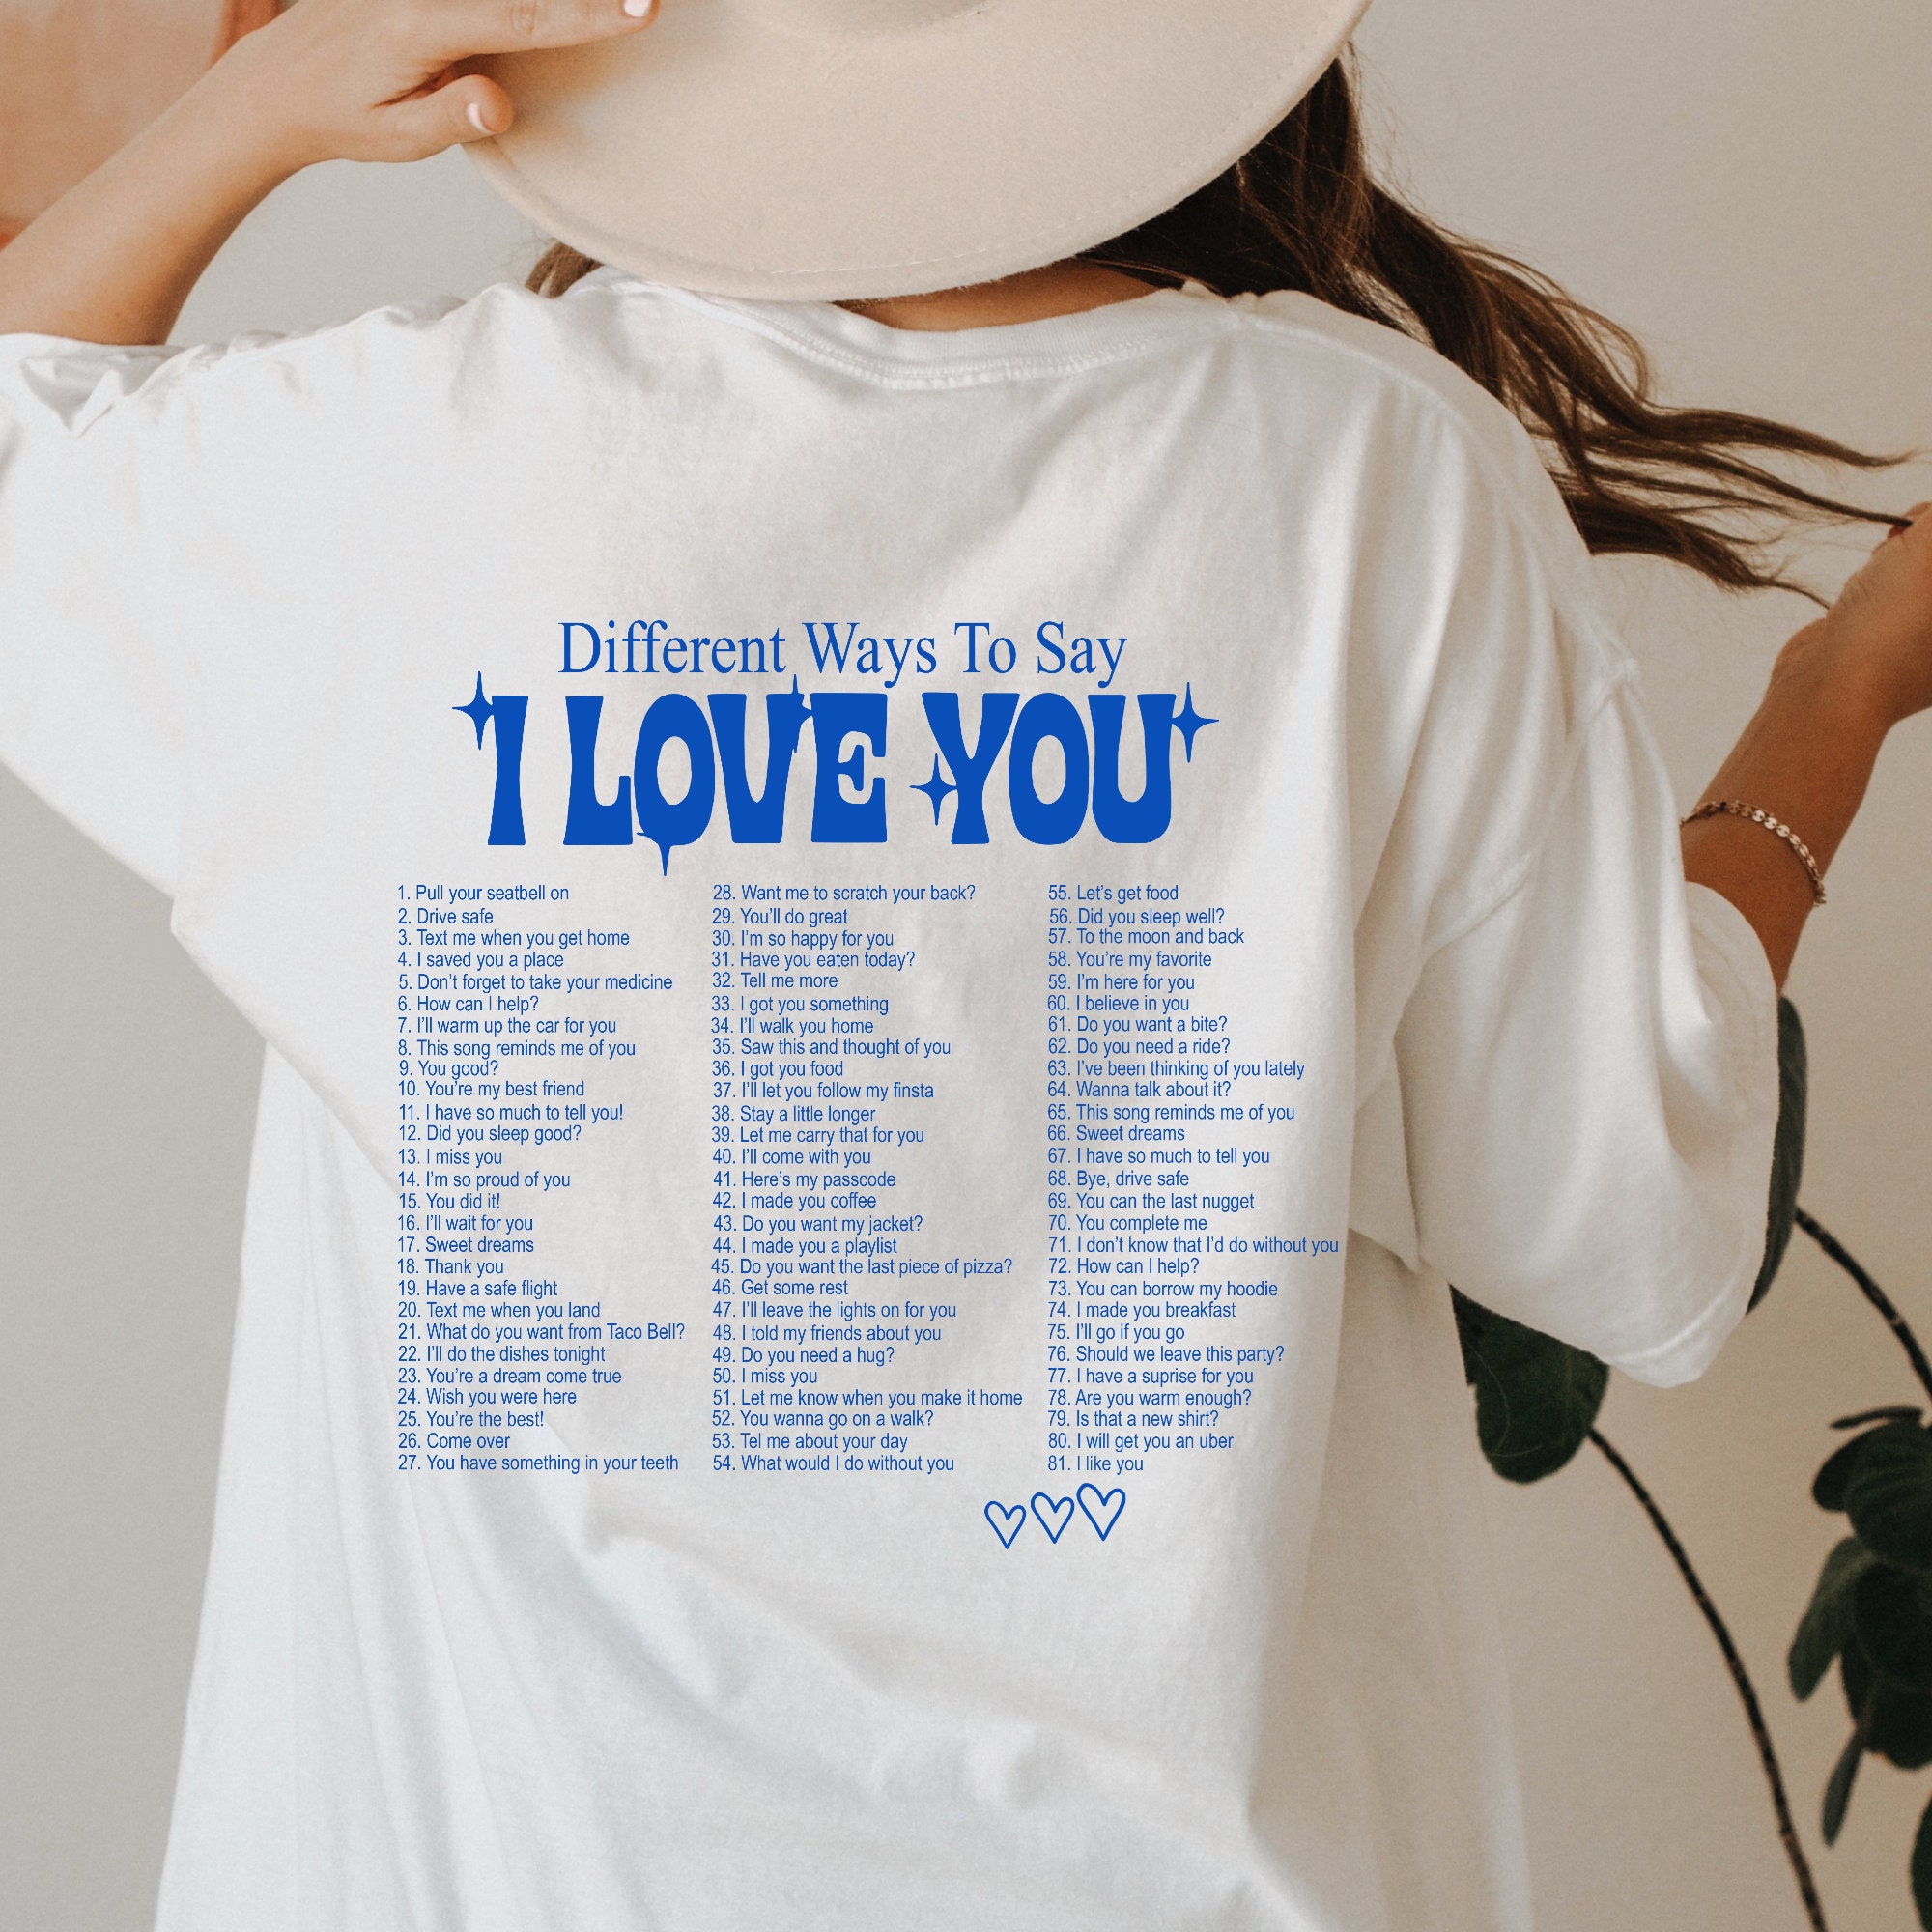 Ways to Say I Love You Shirt, Aesthetic Clothes, Trendy Shirts, Preppy  Clothes for Teens, VSCO Girl, Tumblr Clothing, Indie Shirts -  Hong Kong